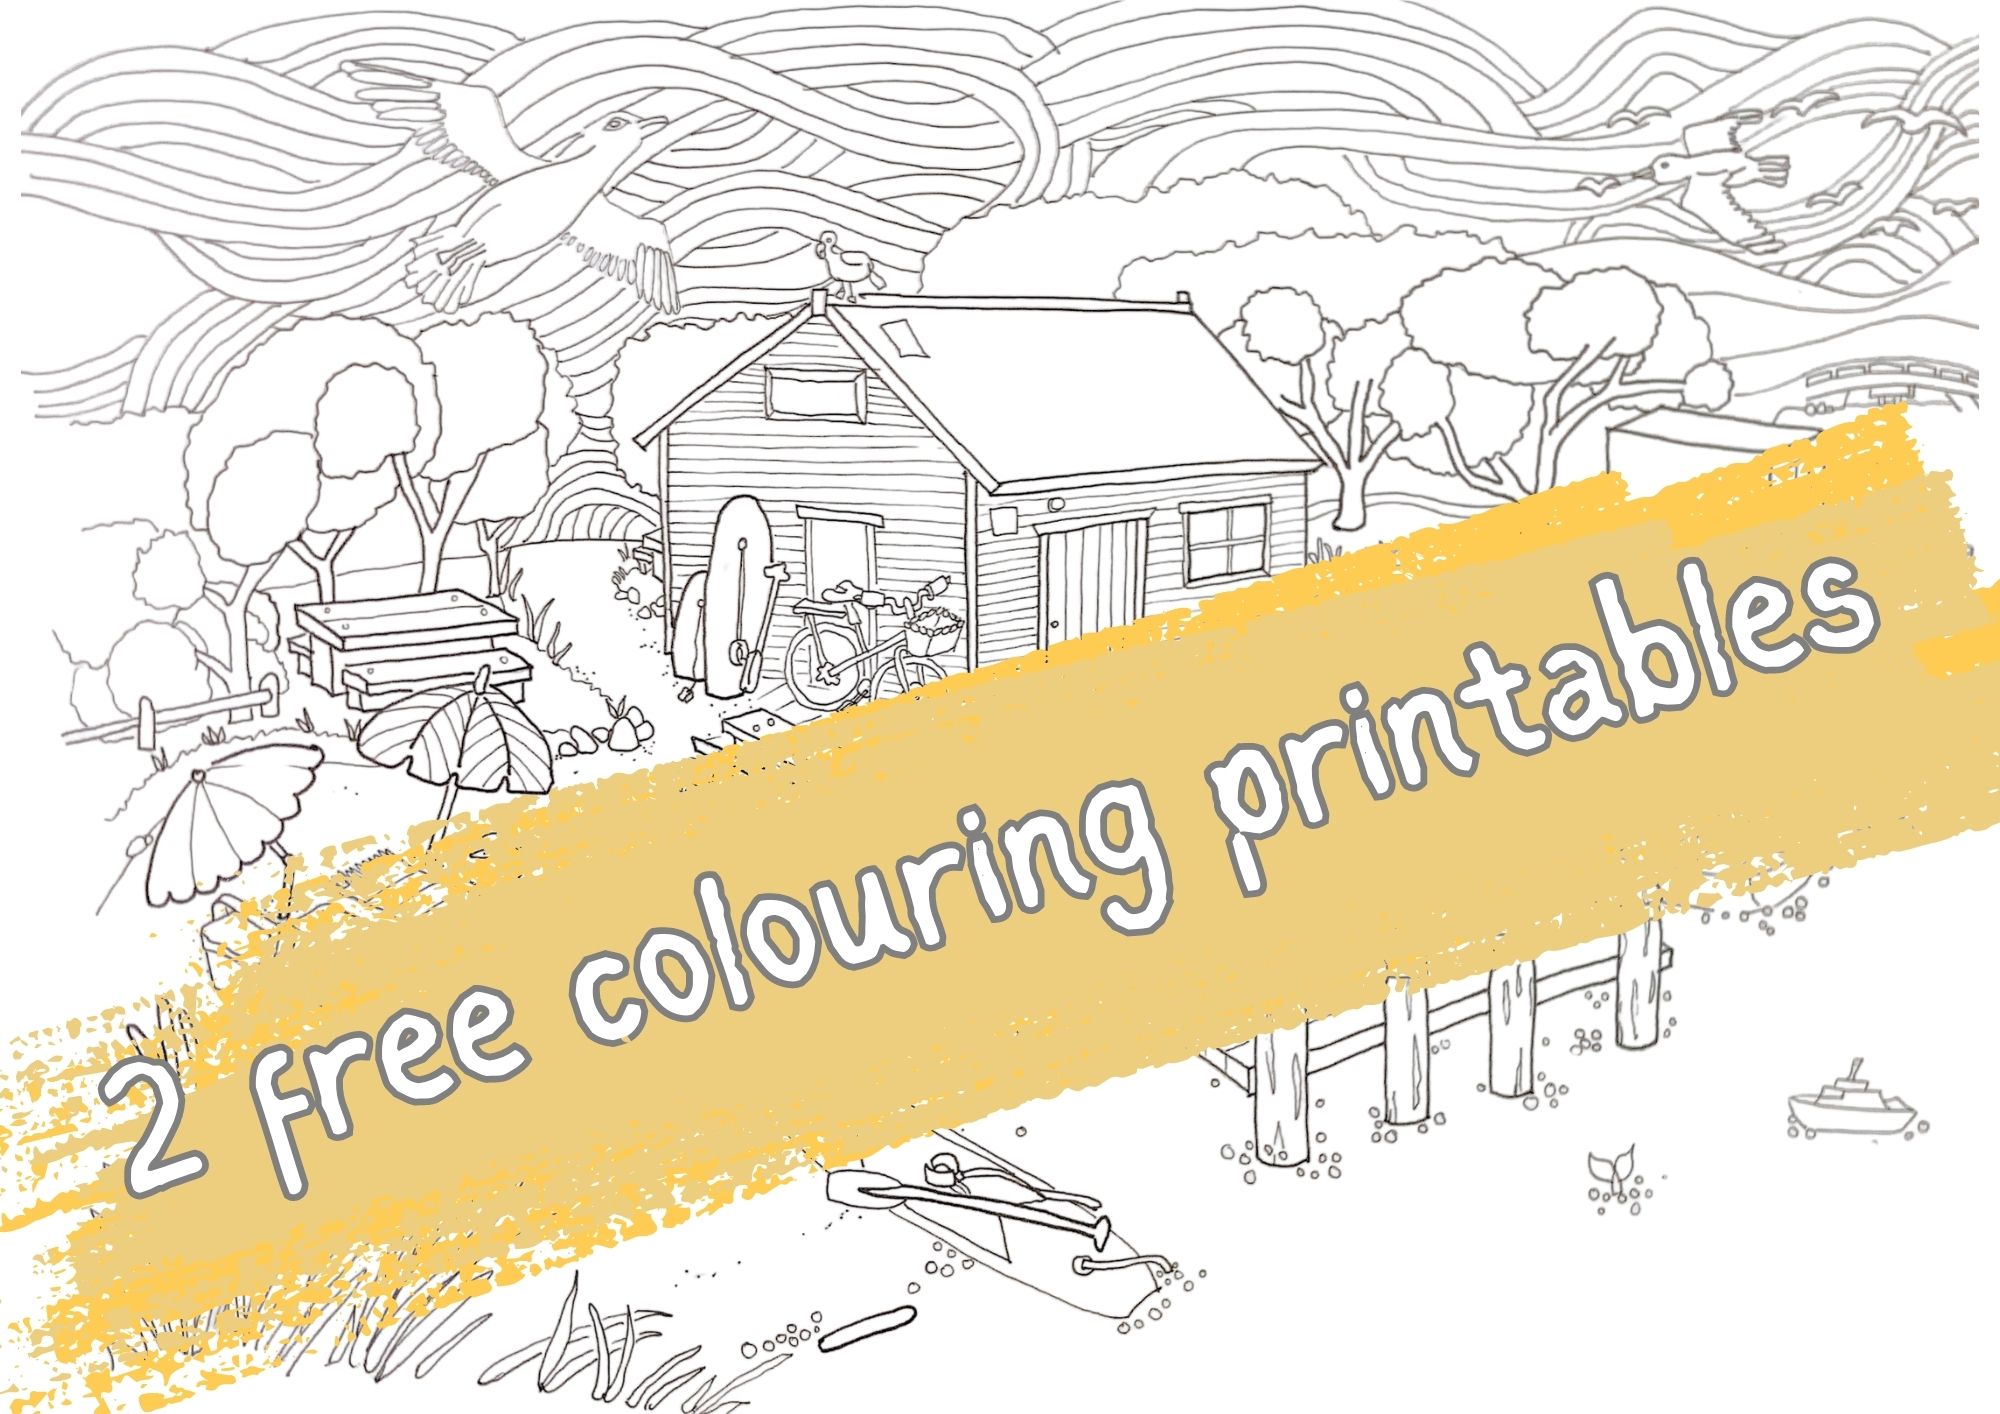 Free beach colourings, colouring pages,